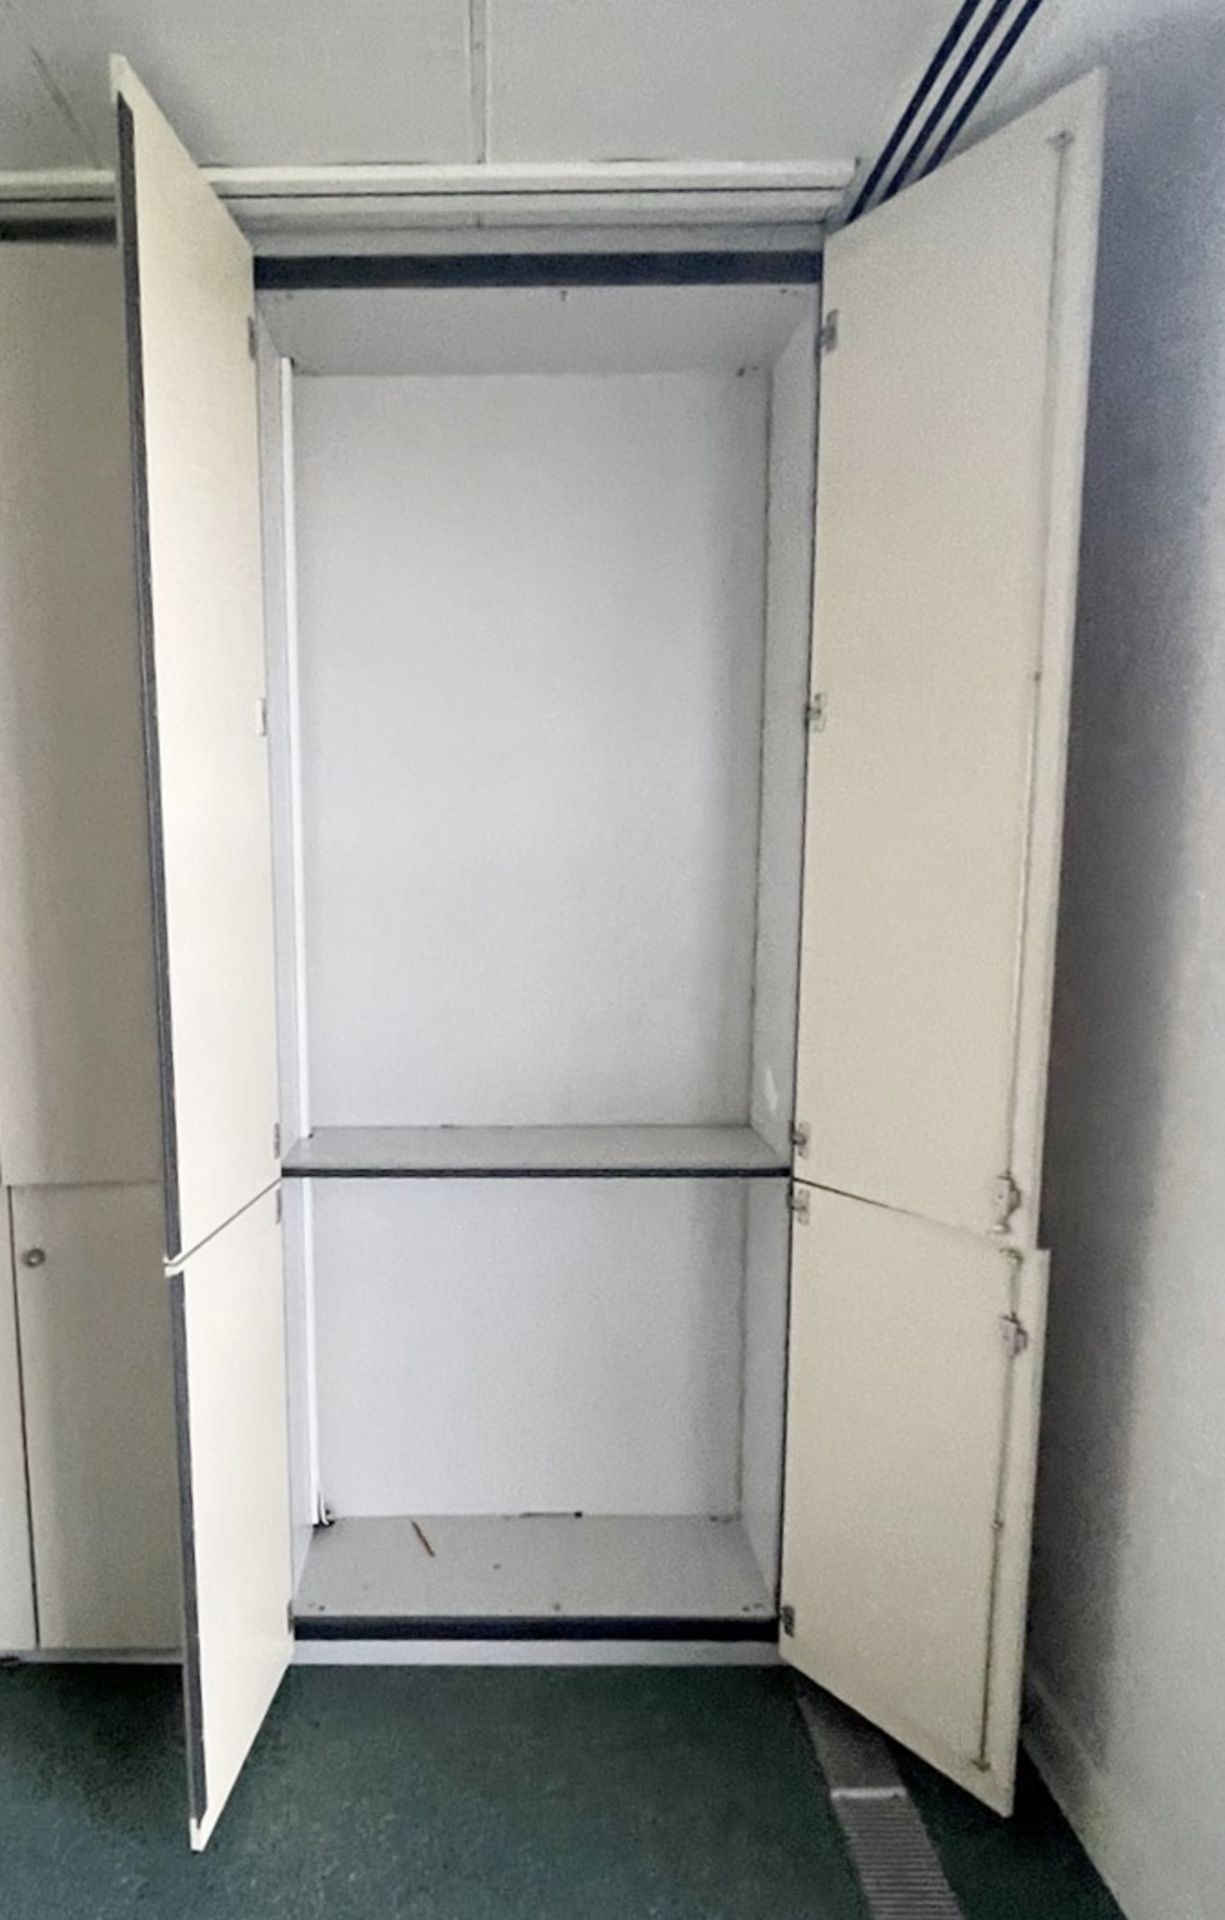 4.8 Metre Wide Bank Of Wall Storage Units - Ref: ED167C - To Be Removed From An Executive Office - Image 4 of 5